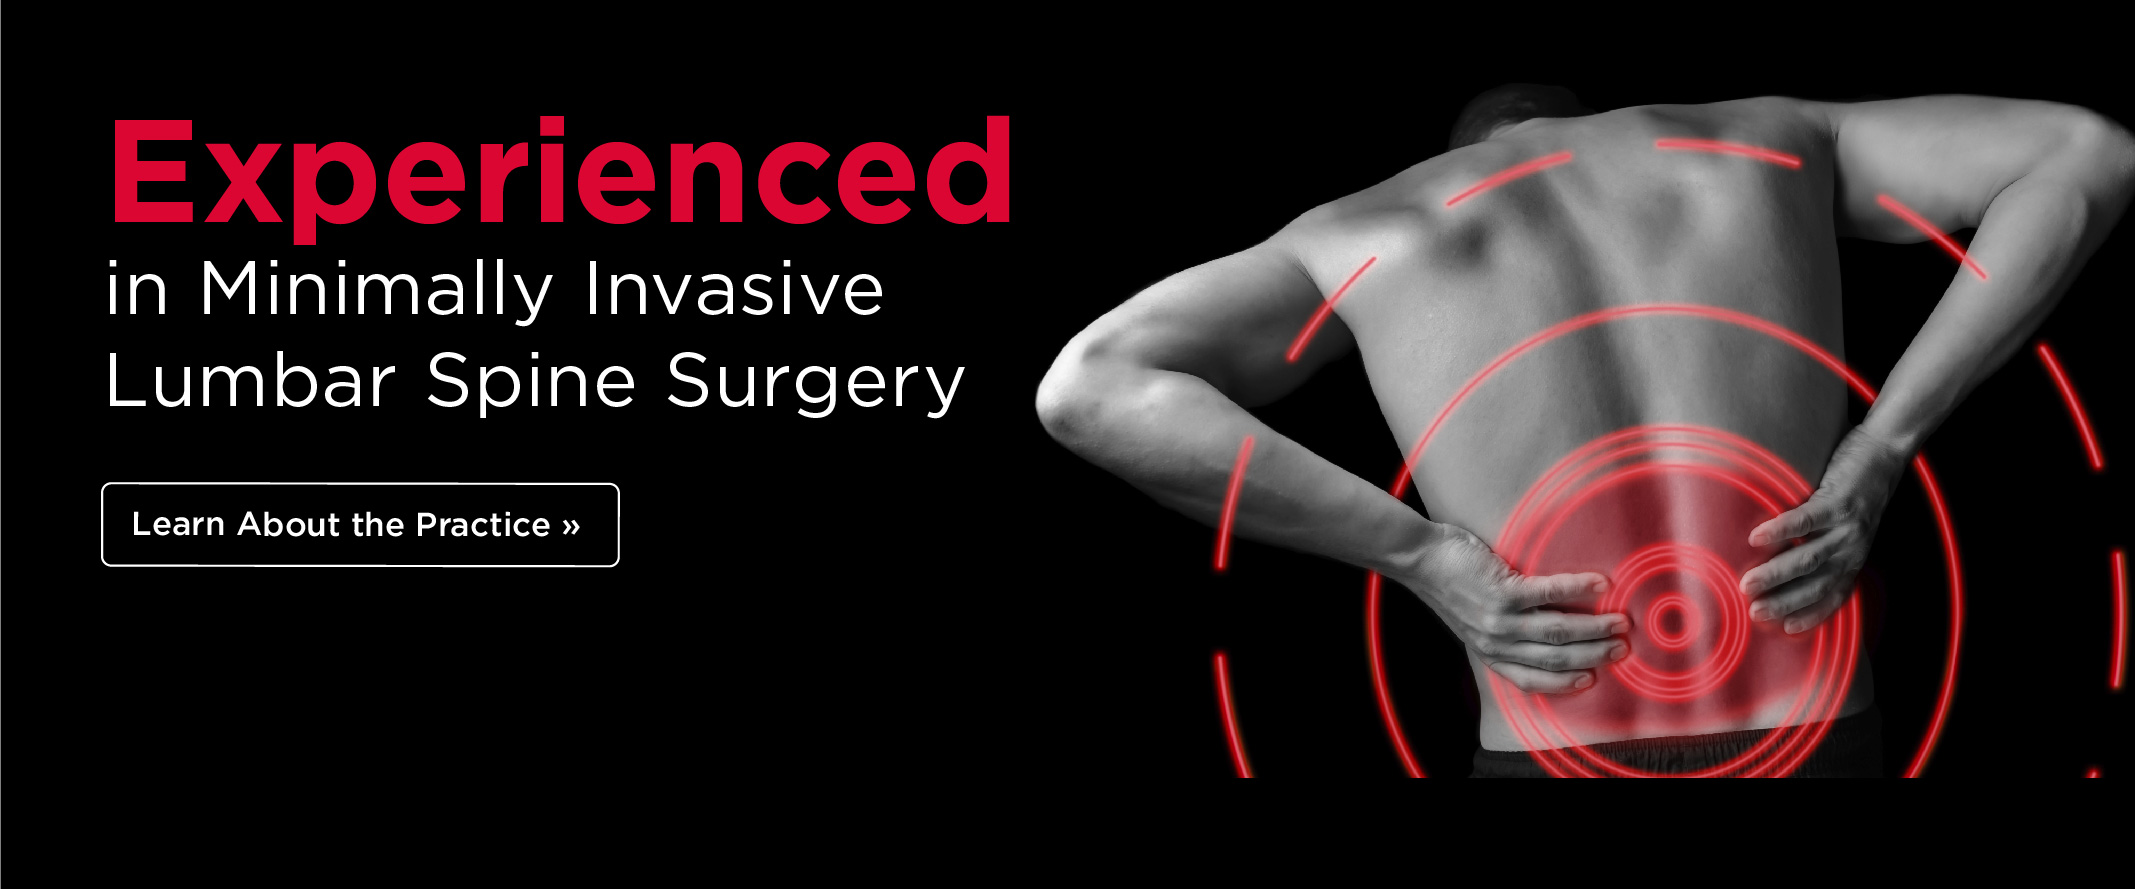 Dr. Paul Crowe Experience in Minimally Invasive Lumbar Spine Surgery